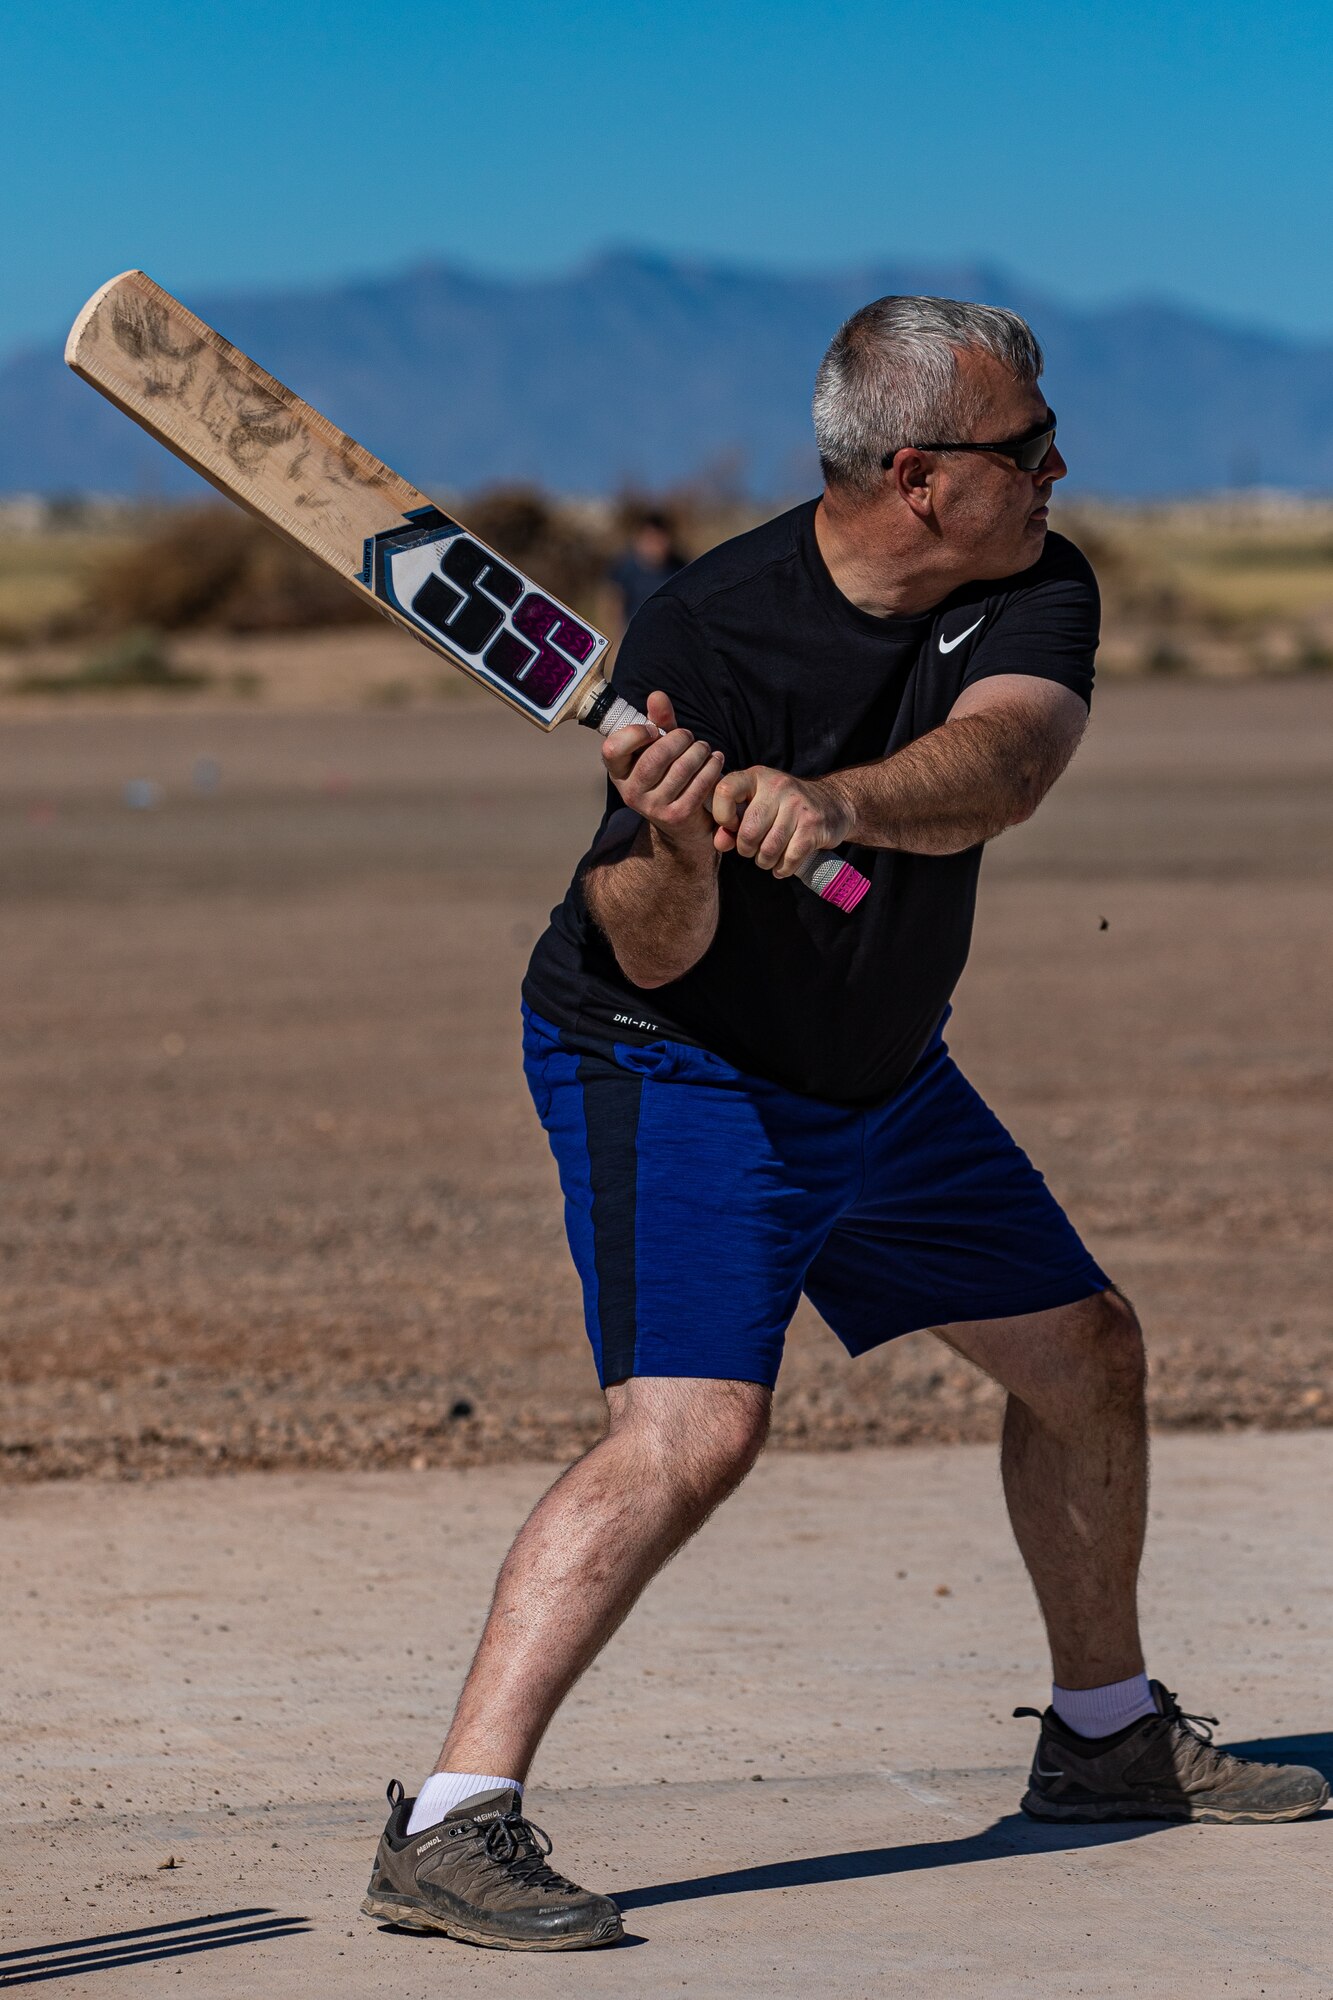 Col. Kent Harbough, Task Force-Holloman chief of staff deployed from Battle Creek Air National Guard Base, Michigan, prepares to bat during a cricket game between U.S. service members and Afghan evacuees at Aman Omid Village on Holloman Air Force Base, New Mexico, Oct. 9, 2021.The Department of Defense, through U.S. Northern Command, and in support of the Department of Homeland Security, is providing transportation, temporary housing, medical screening, and general support for at least 50,000 Afghan evacuees at suitable facilities, in permanent or temporary structures, as quickly as possible. This initiative provides Afghan personnel essential support at secure locations outside Afghanistan. (U.S. Army photo by Pfc. Anthony Sanchez)